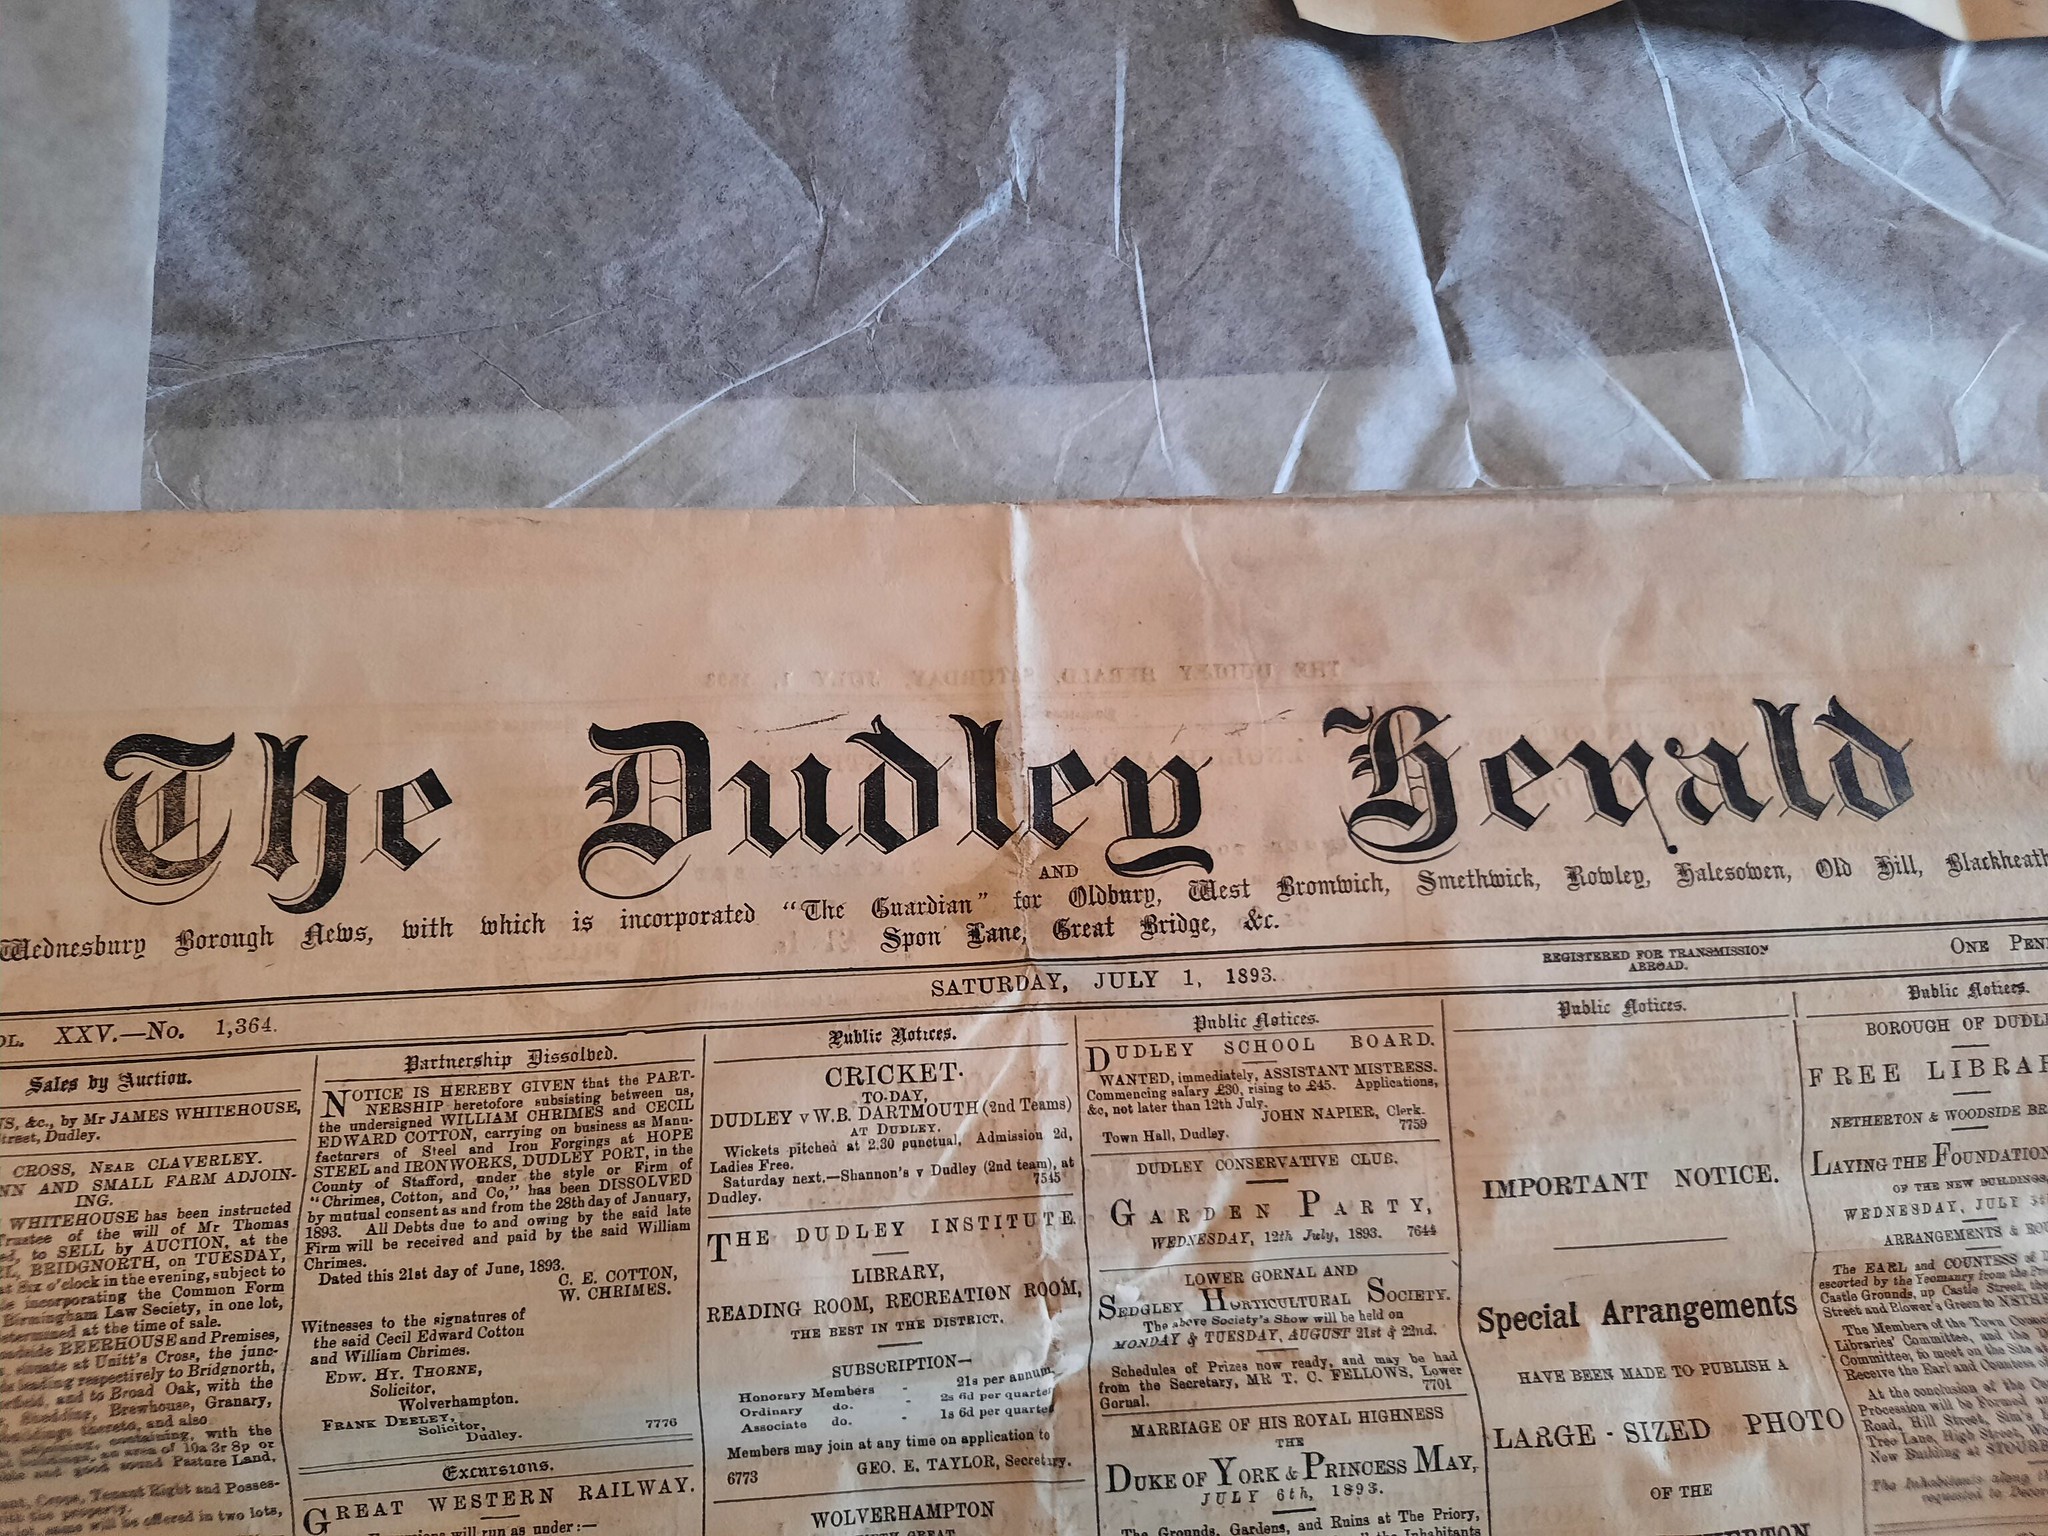 The front page of the Dudley Herald, the newspaper was found with two others in the time capsule.